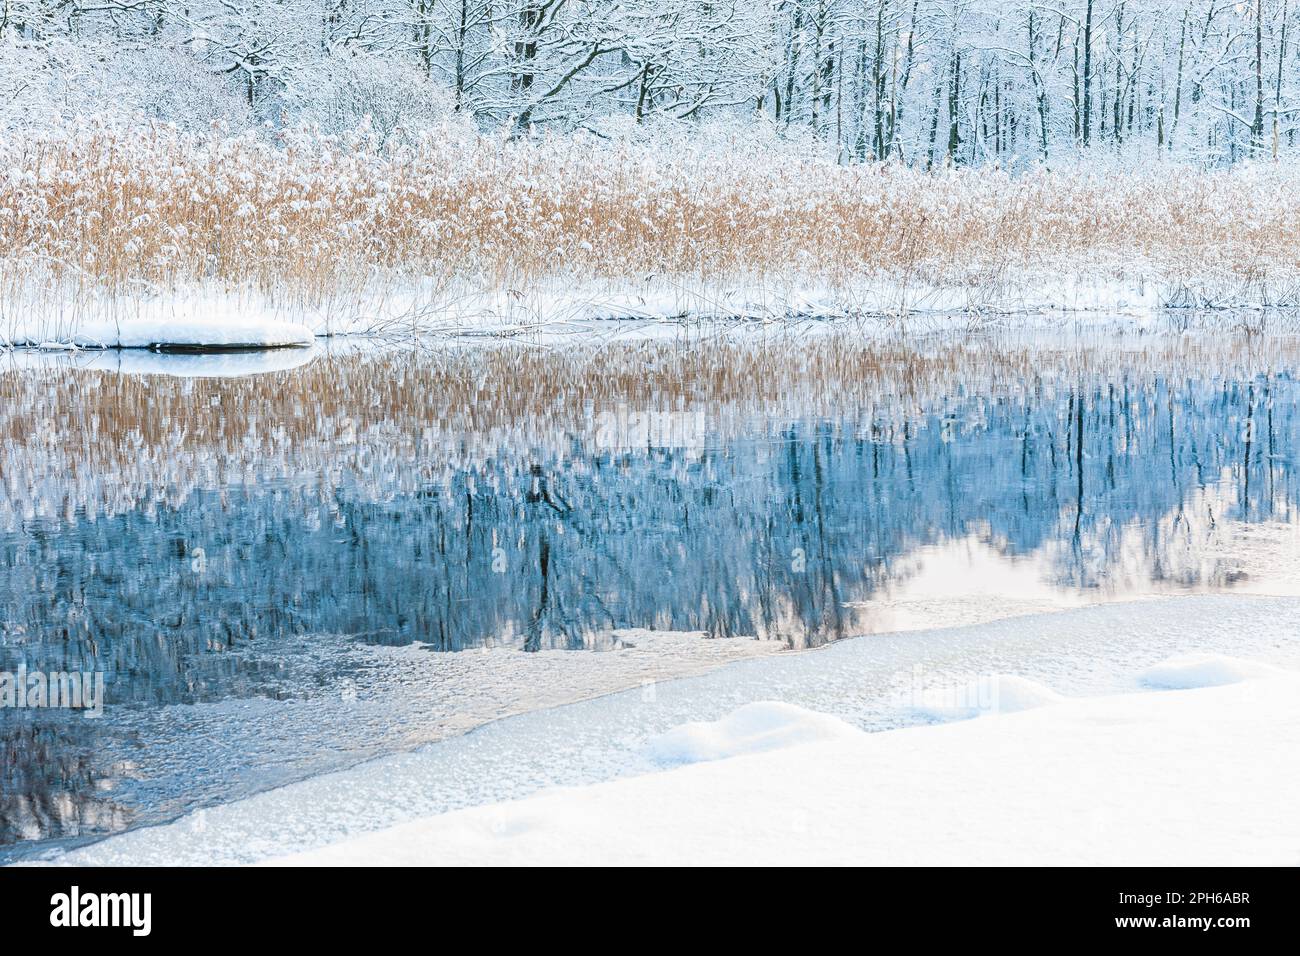 A serene winter scene of a snow-covered river reflecting the frosty reeds in tranquil stillness. Stock Photo